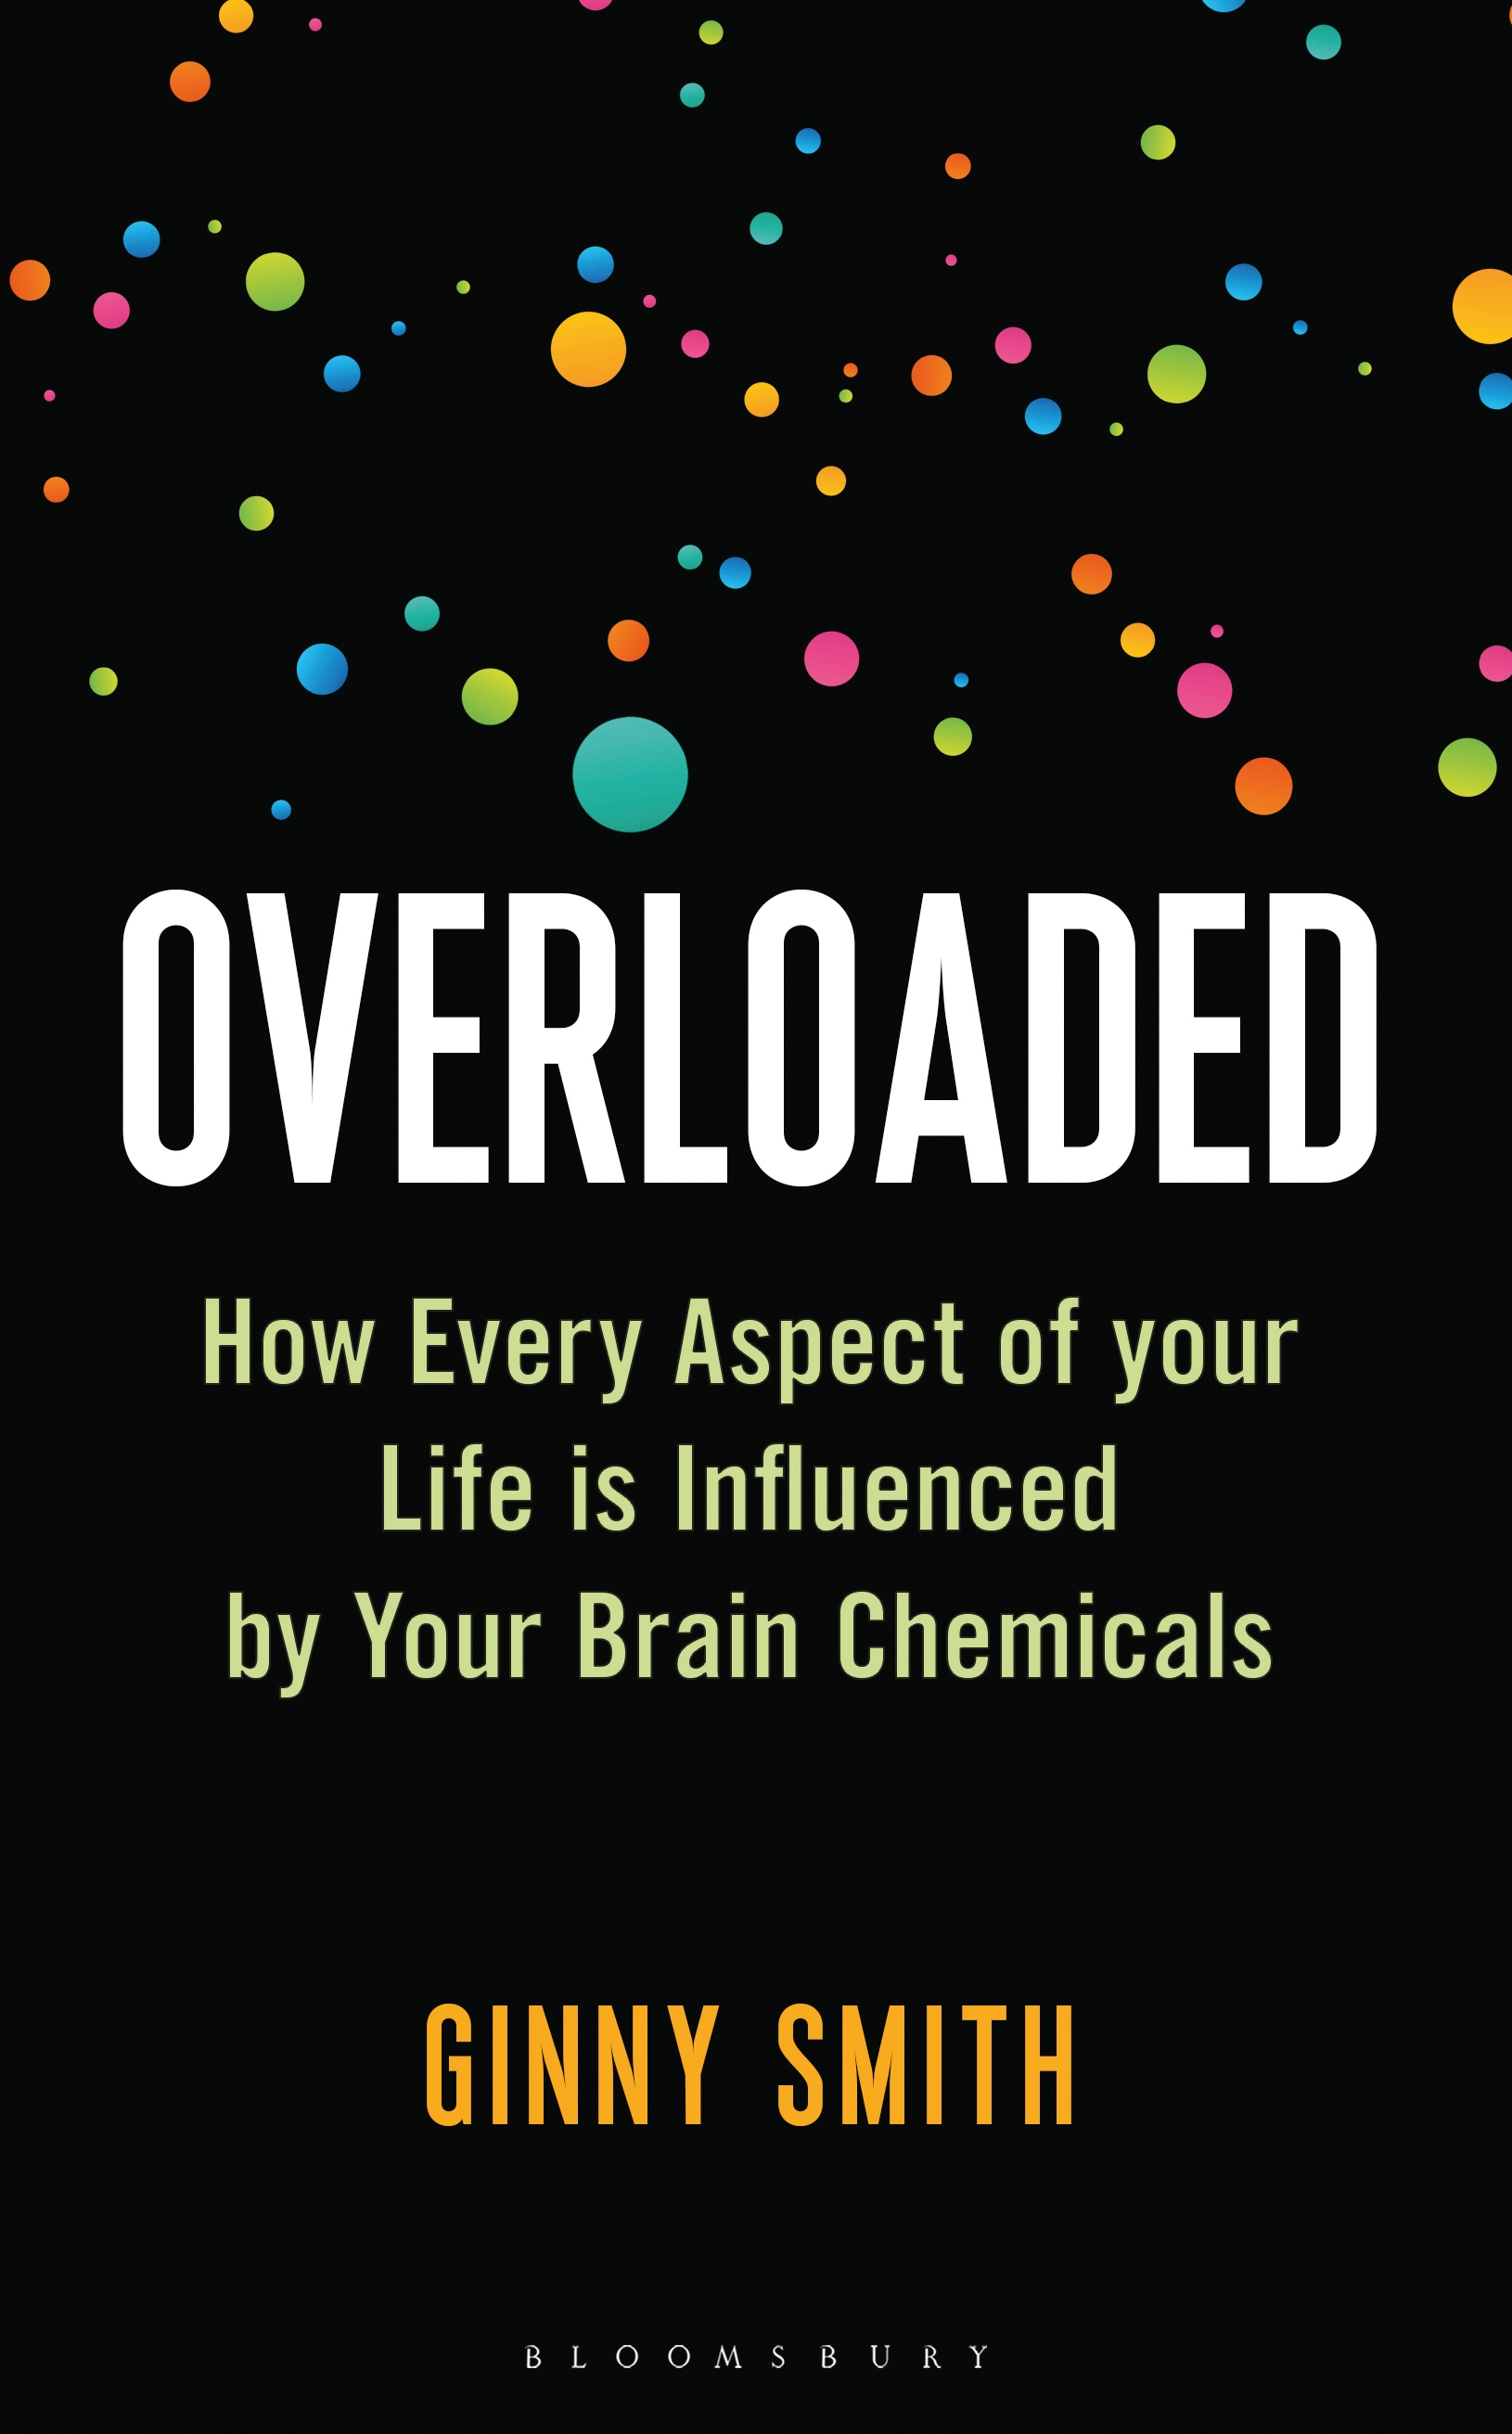 Overloaded, by Ginny Smith